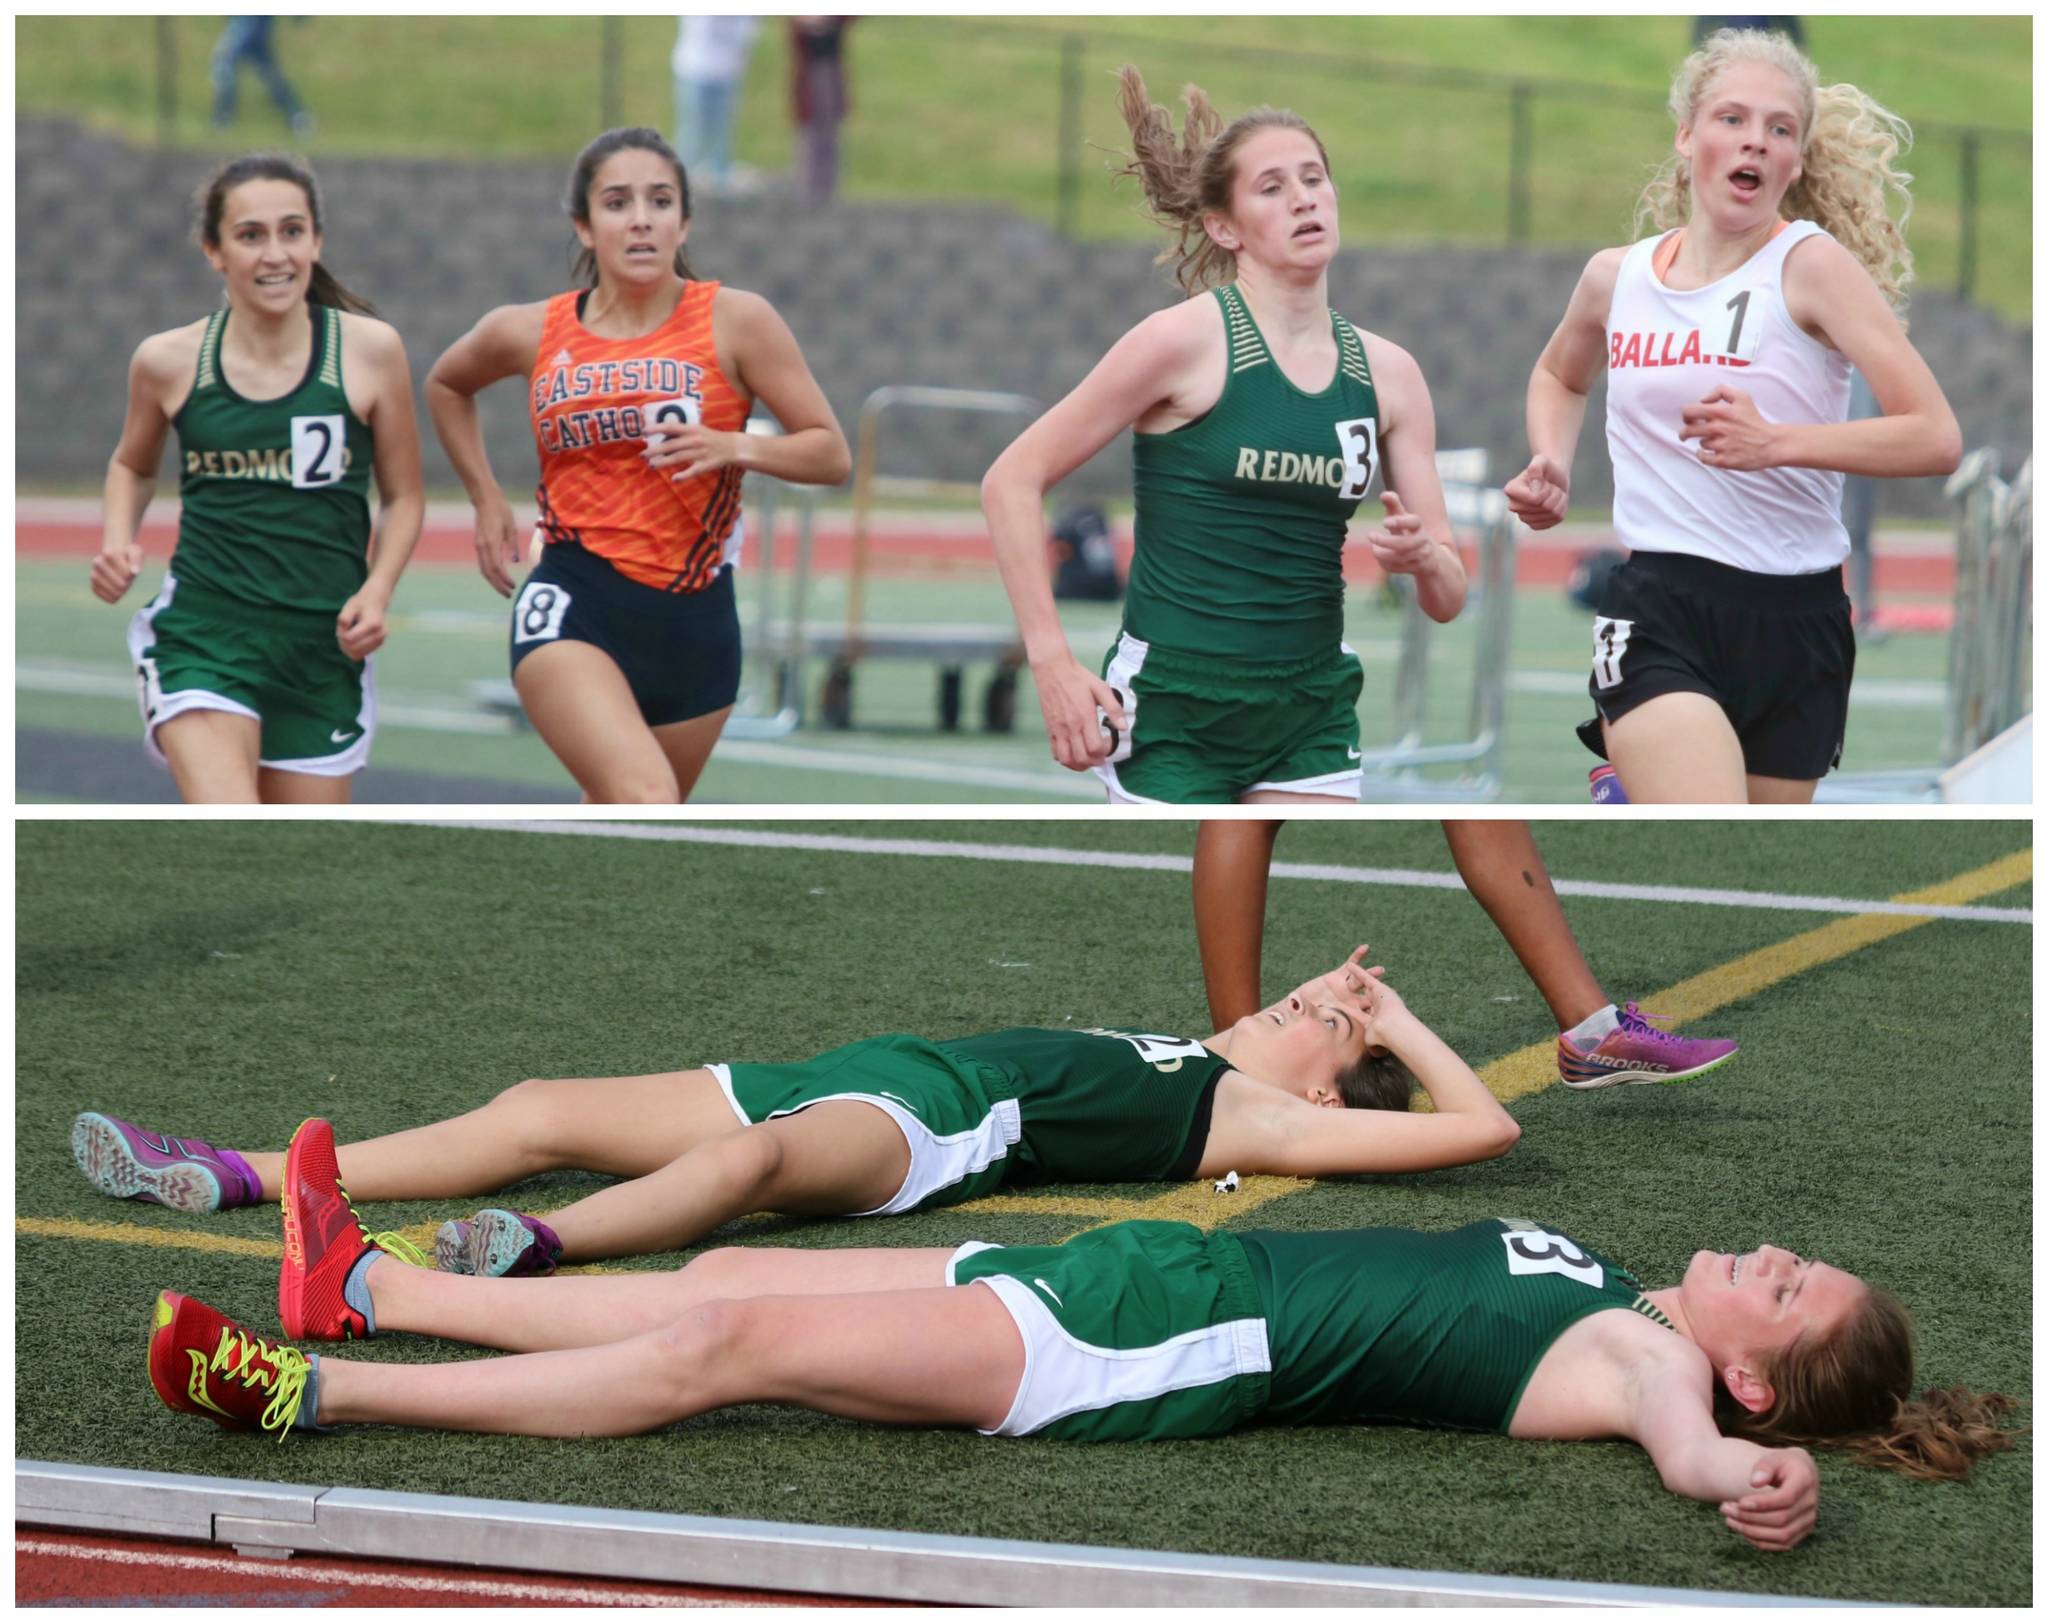 Top: Redmond’s Chloe Connolly (2) and teammate Lili Hargreaves (3) dash toward the finish line in the 3,200 meters at districts. Hargreaves took third in 11:10.83 and Connolly finished sixth in 11:11.74. Both times were PRs. Below: Connolly, left, and Hargreaves catch their breath after running the 3,200. Andy Nystrom / staff photos